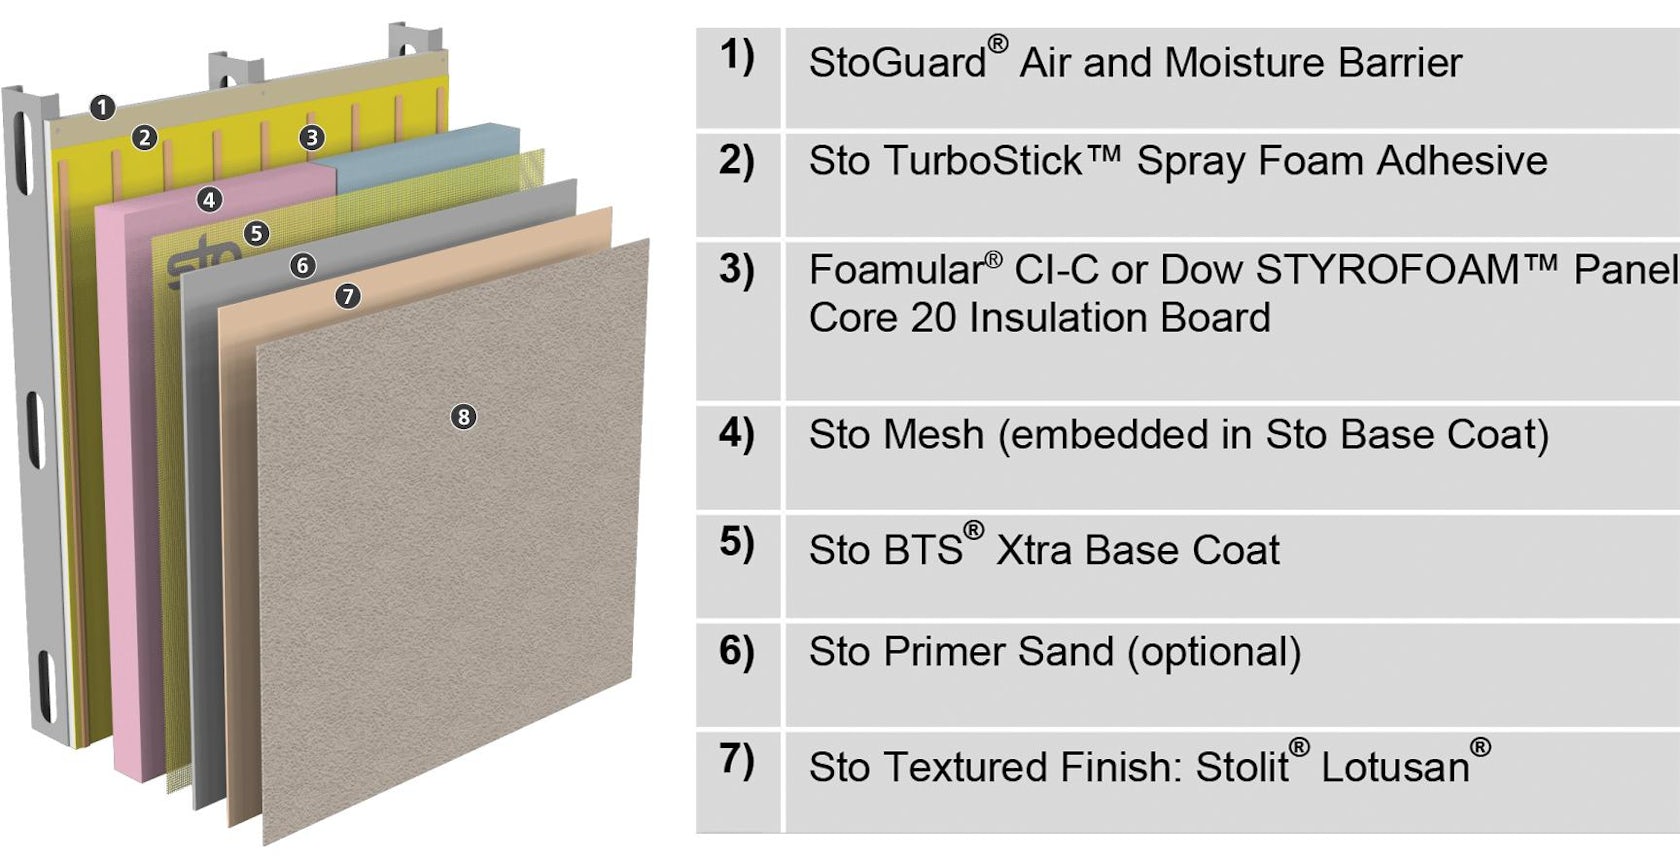 Moisture Control in Buildings: Definitive Guide - Sto Corp.